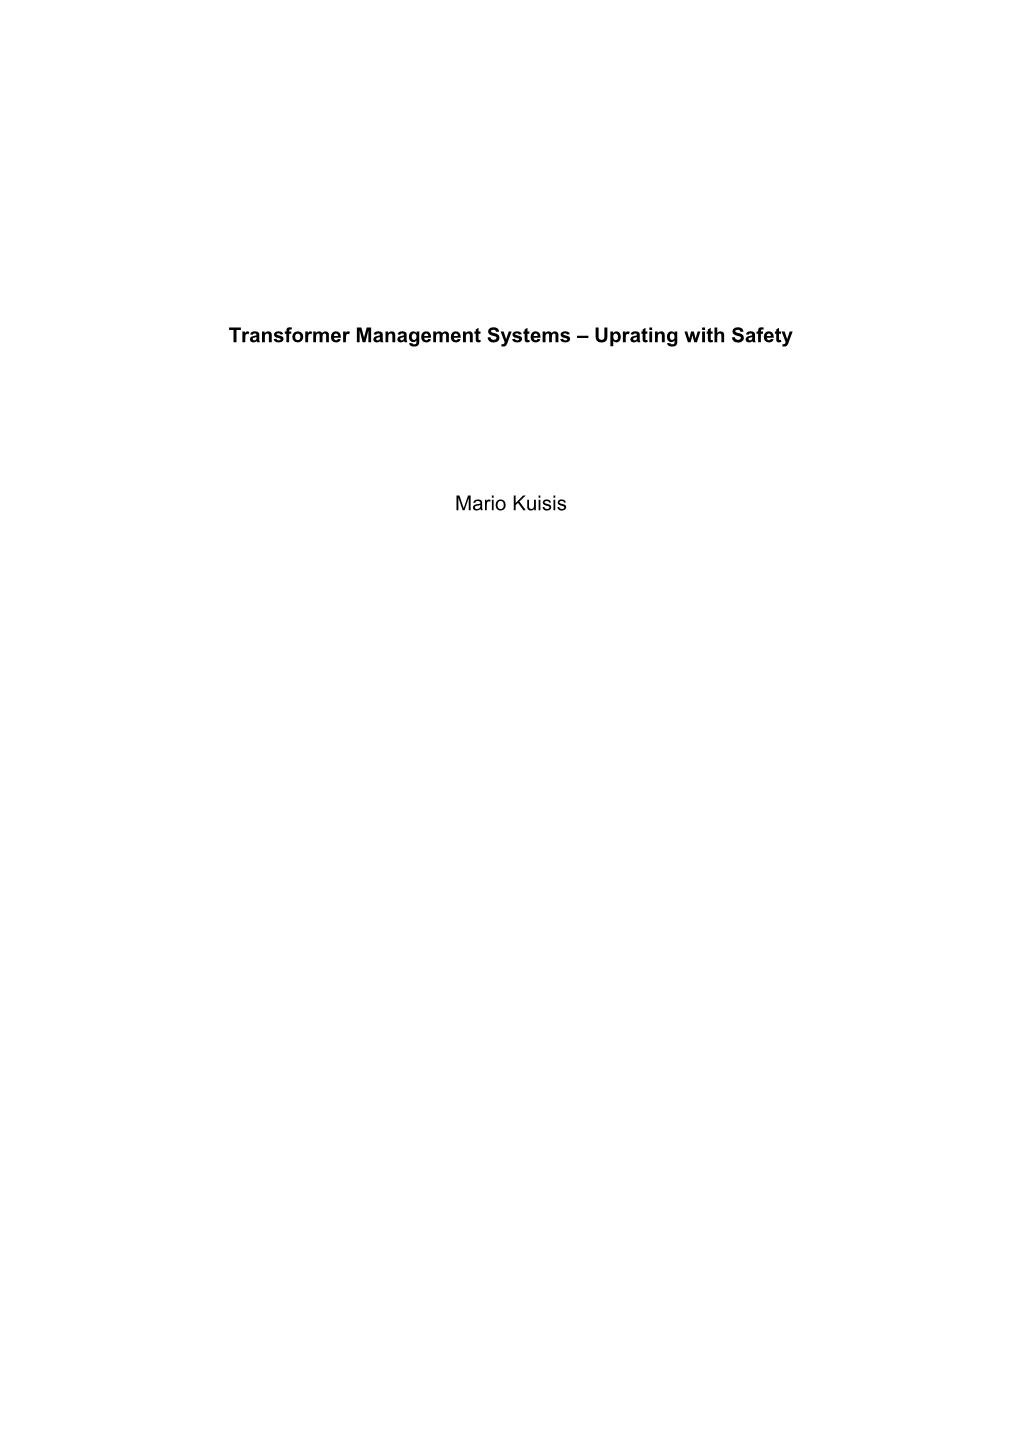 Transformer Management Systems Upgrading with Safety